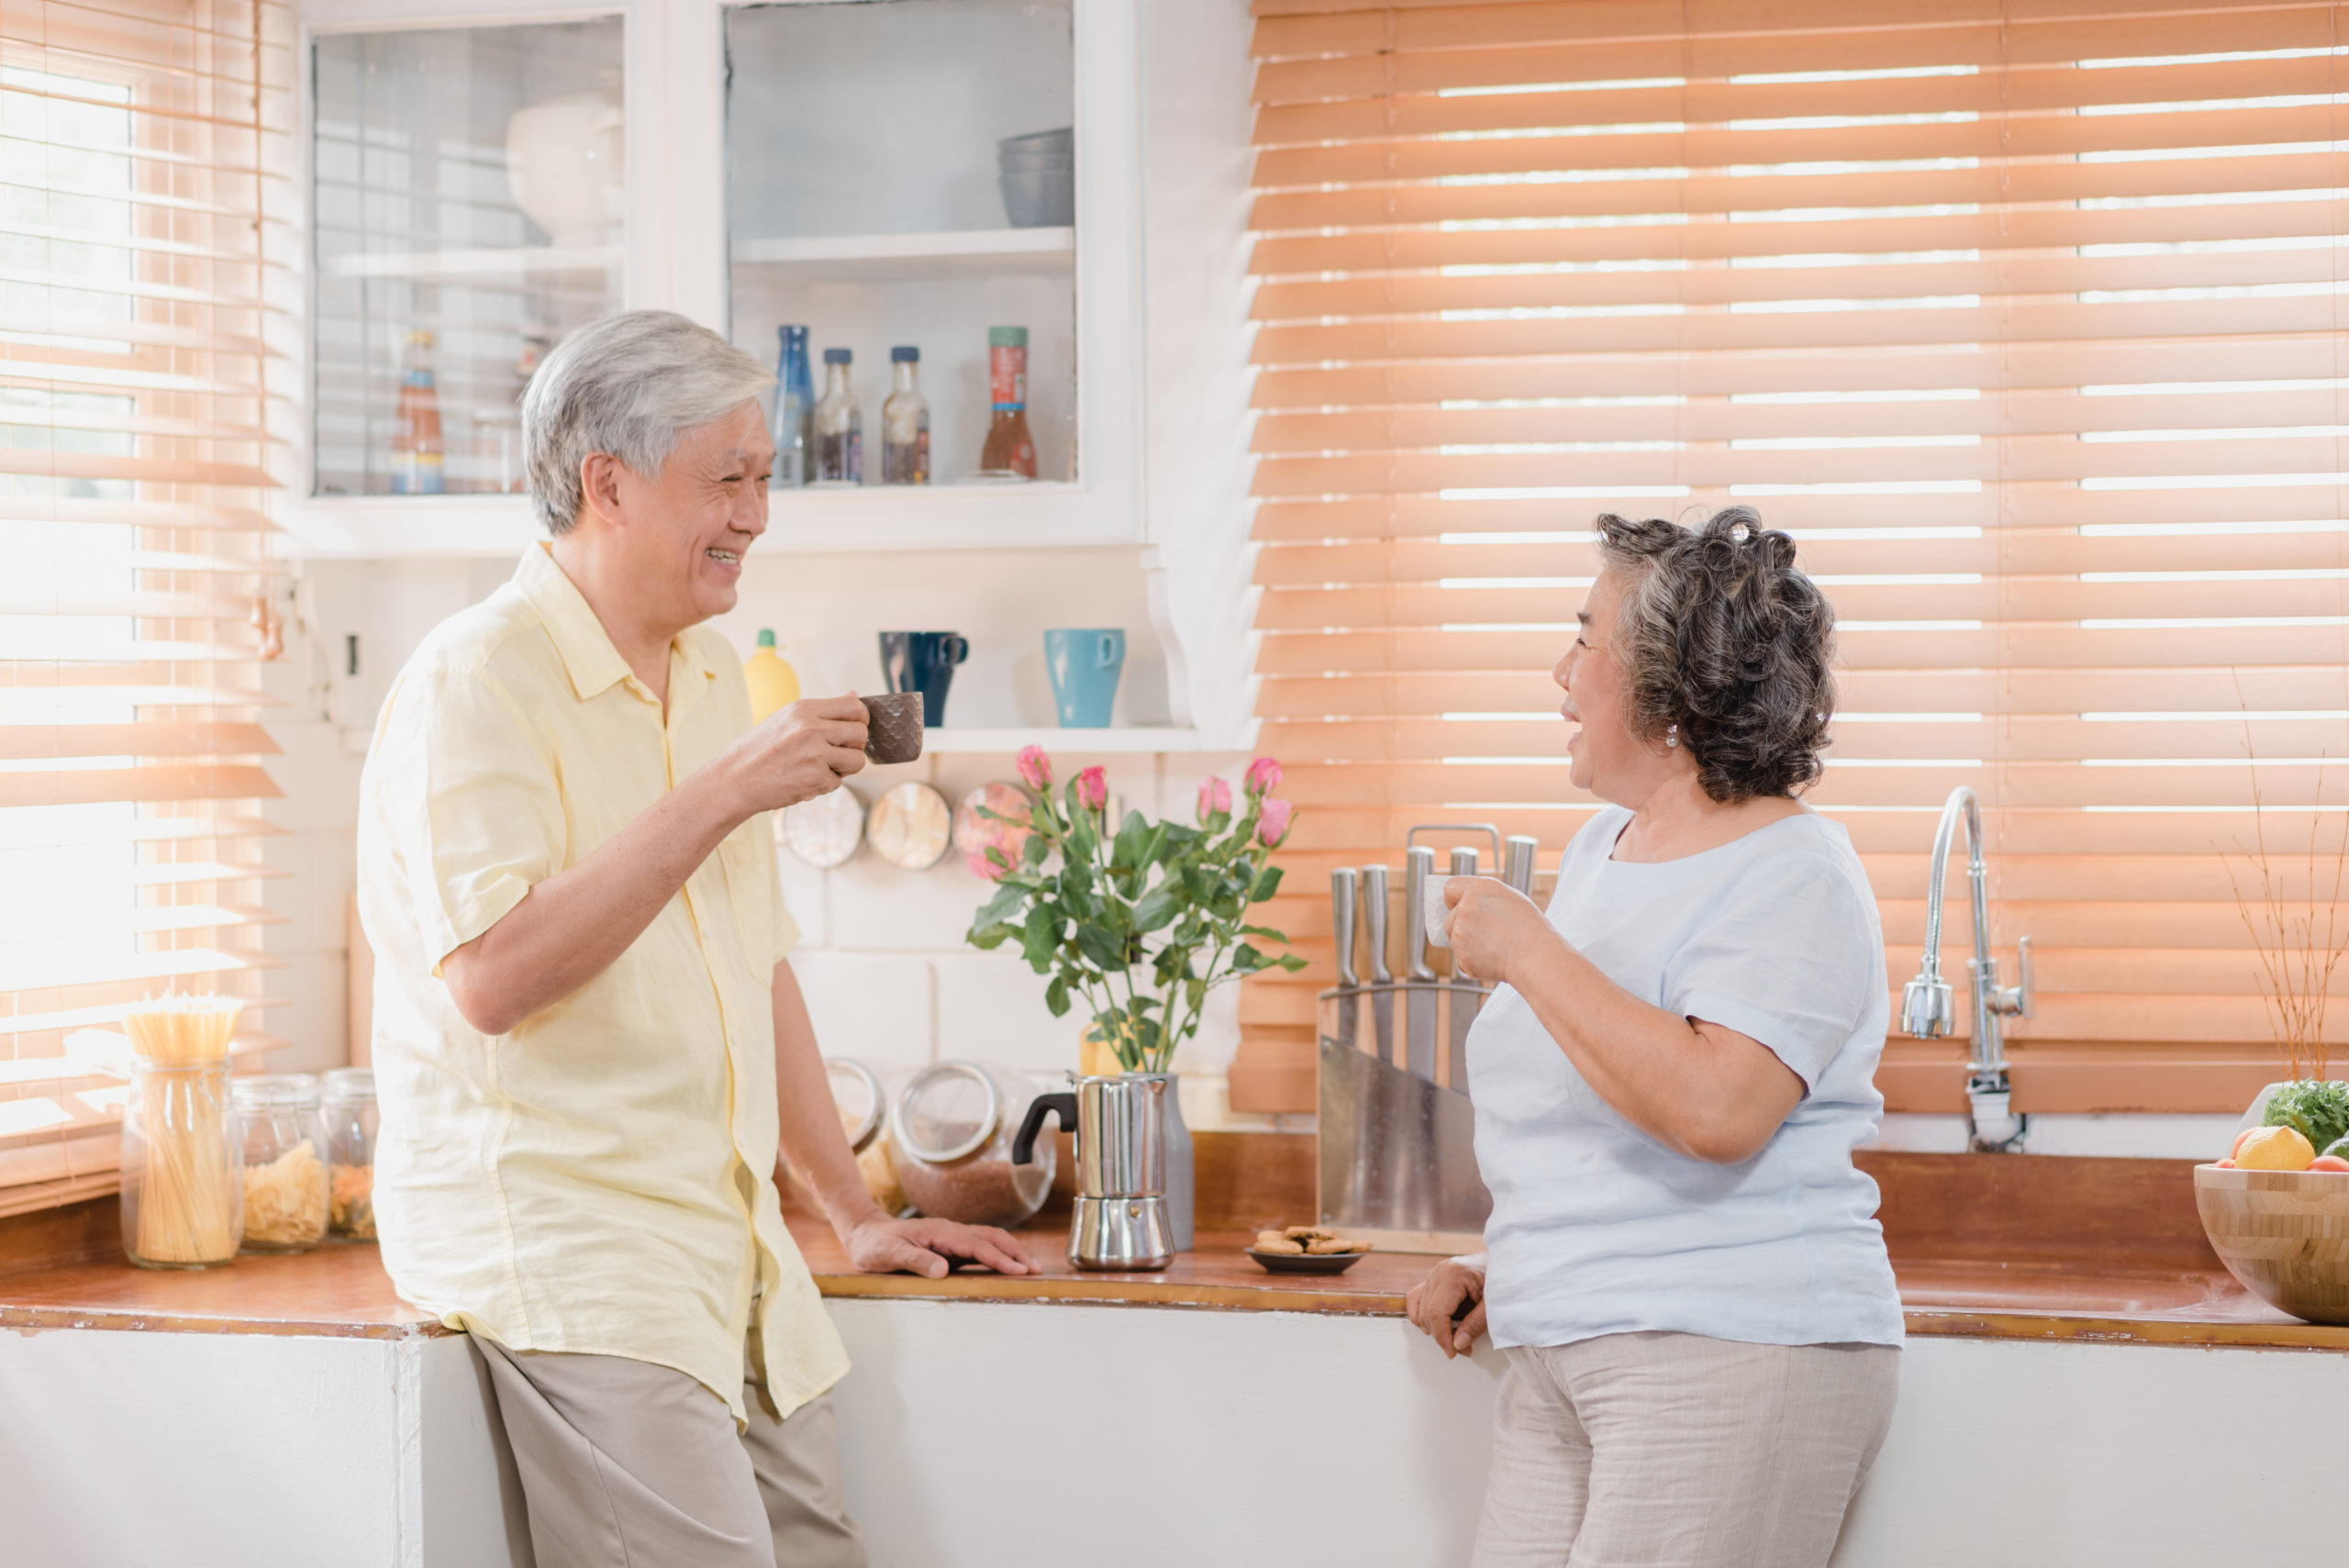 Asian elderly couple drinking warm coffee and talking together in kitchen at home. Chinese couple enjoy love moment while taking together at home. Lifestyle senior family at home concept.